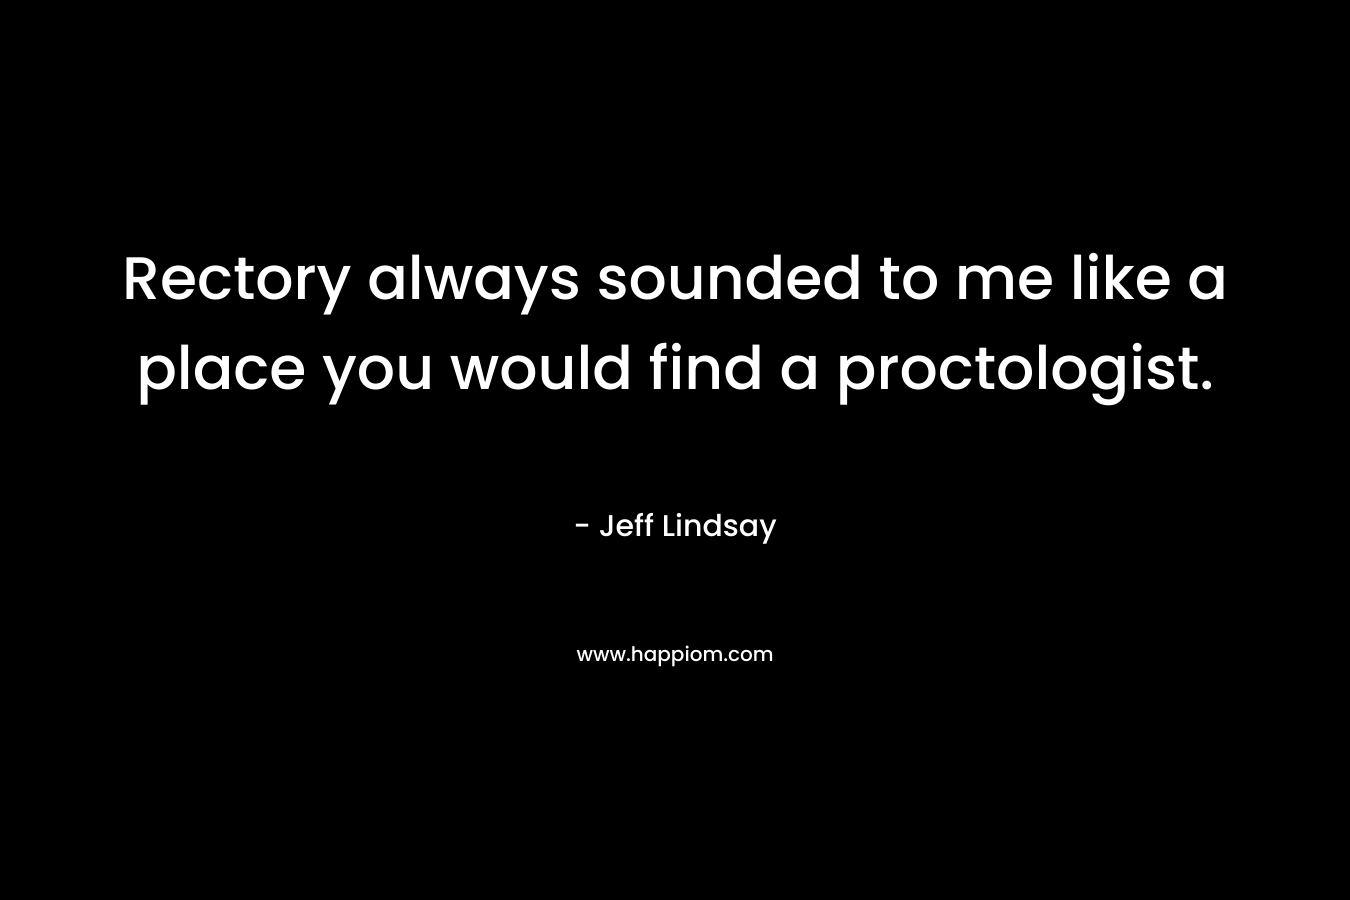 Rectory always sounded to me like a place you would find a proctologist. – Jeff Lindsay